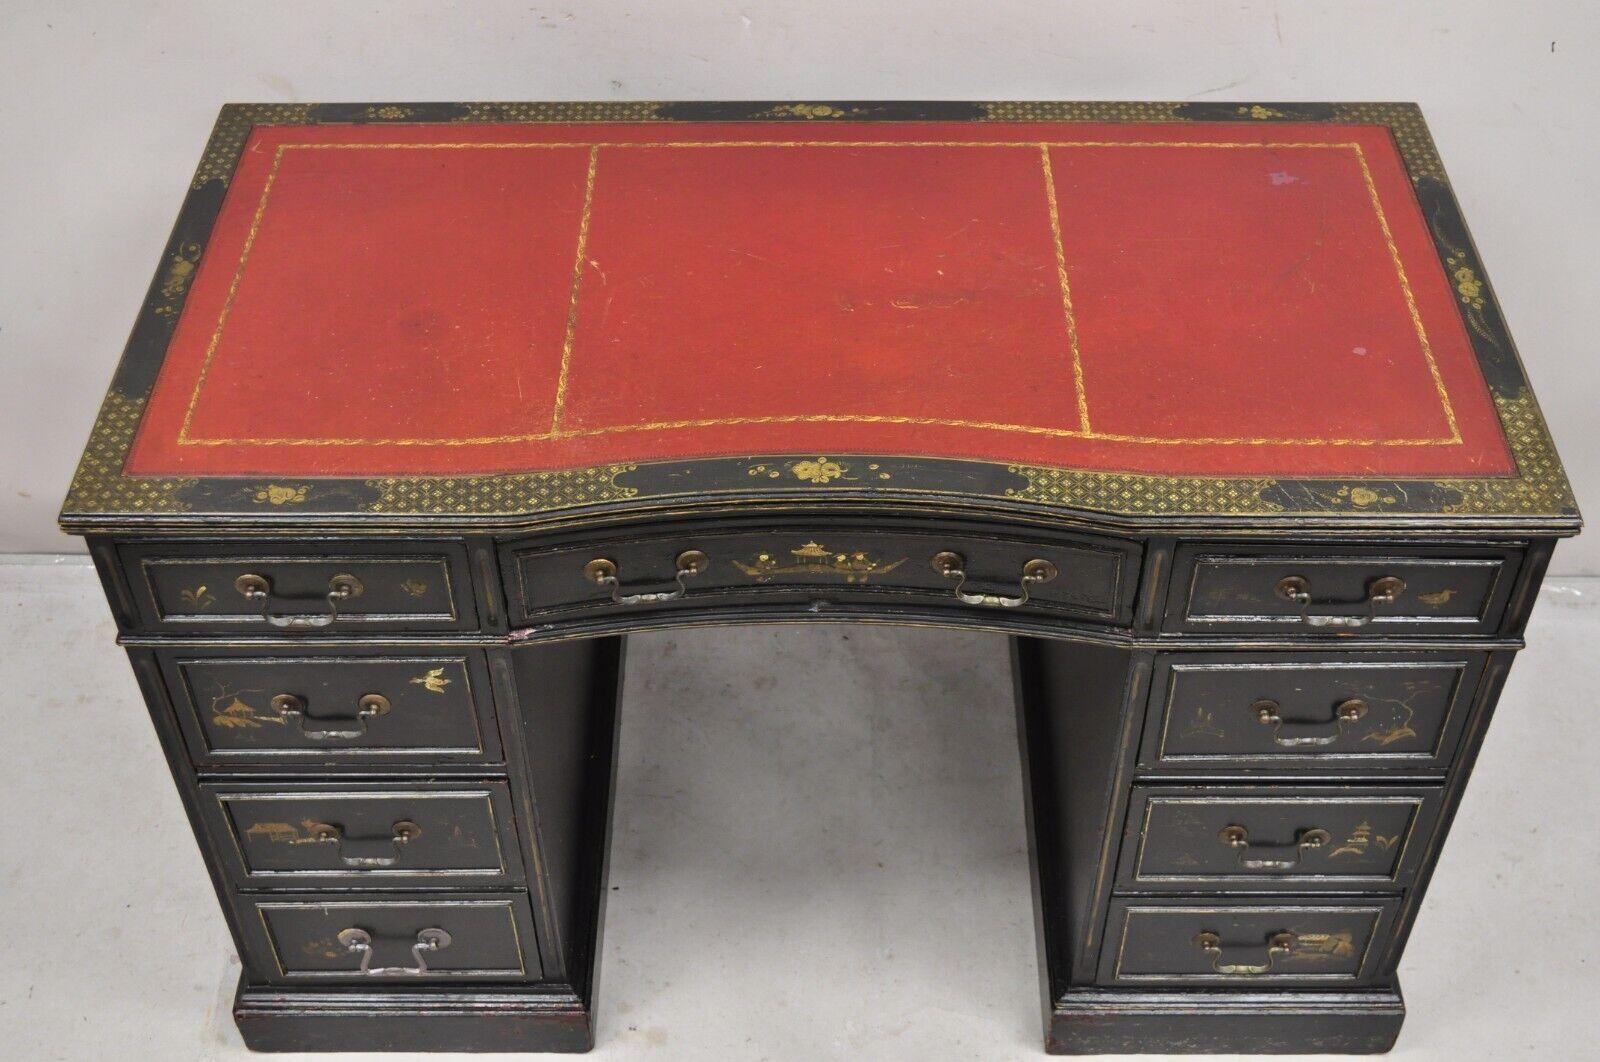 Vintage Chinoiserie Black Chinese Painted Red Leather Top Kneehole Writing Desk. item features 7 drawers, red tooled leather top, hand painted scenes and details on all sides including the finished back, very unique vintage desk. Circa Early 20th